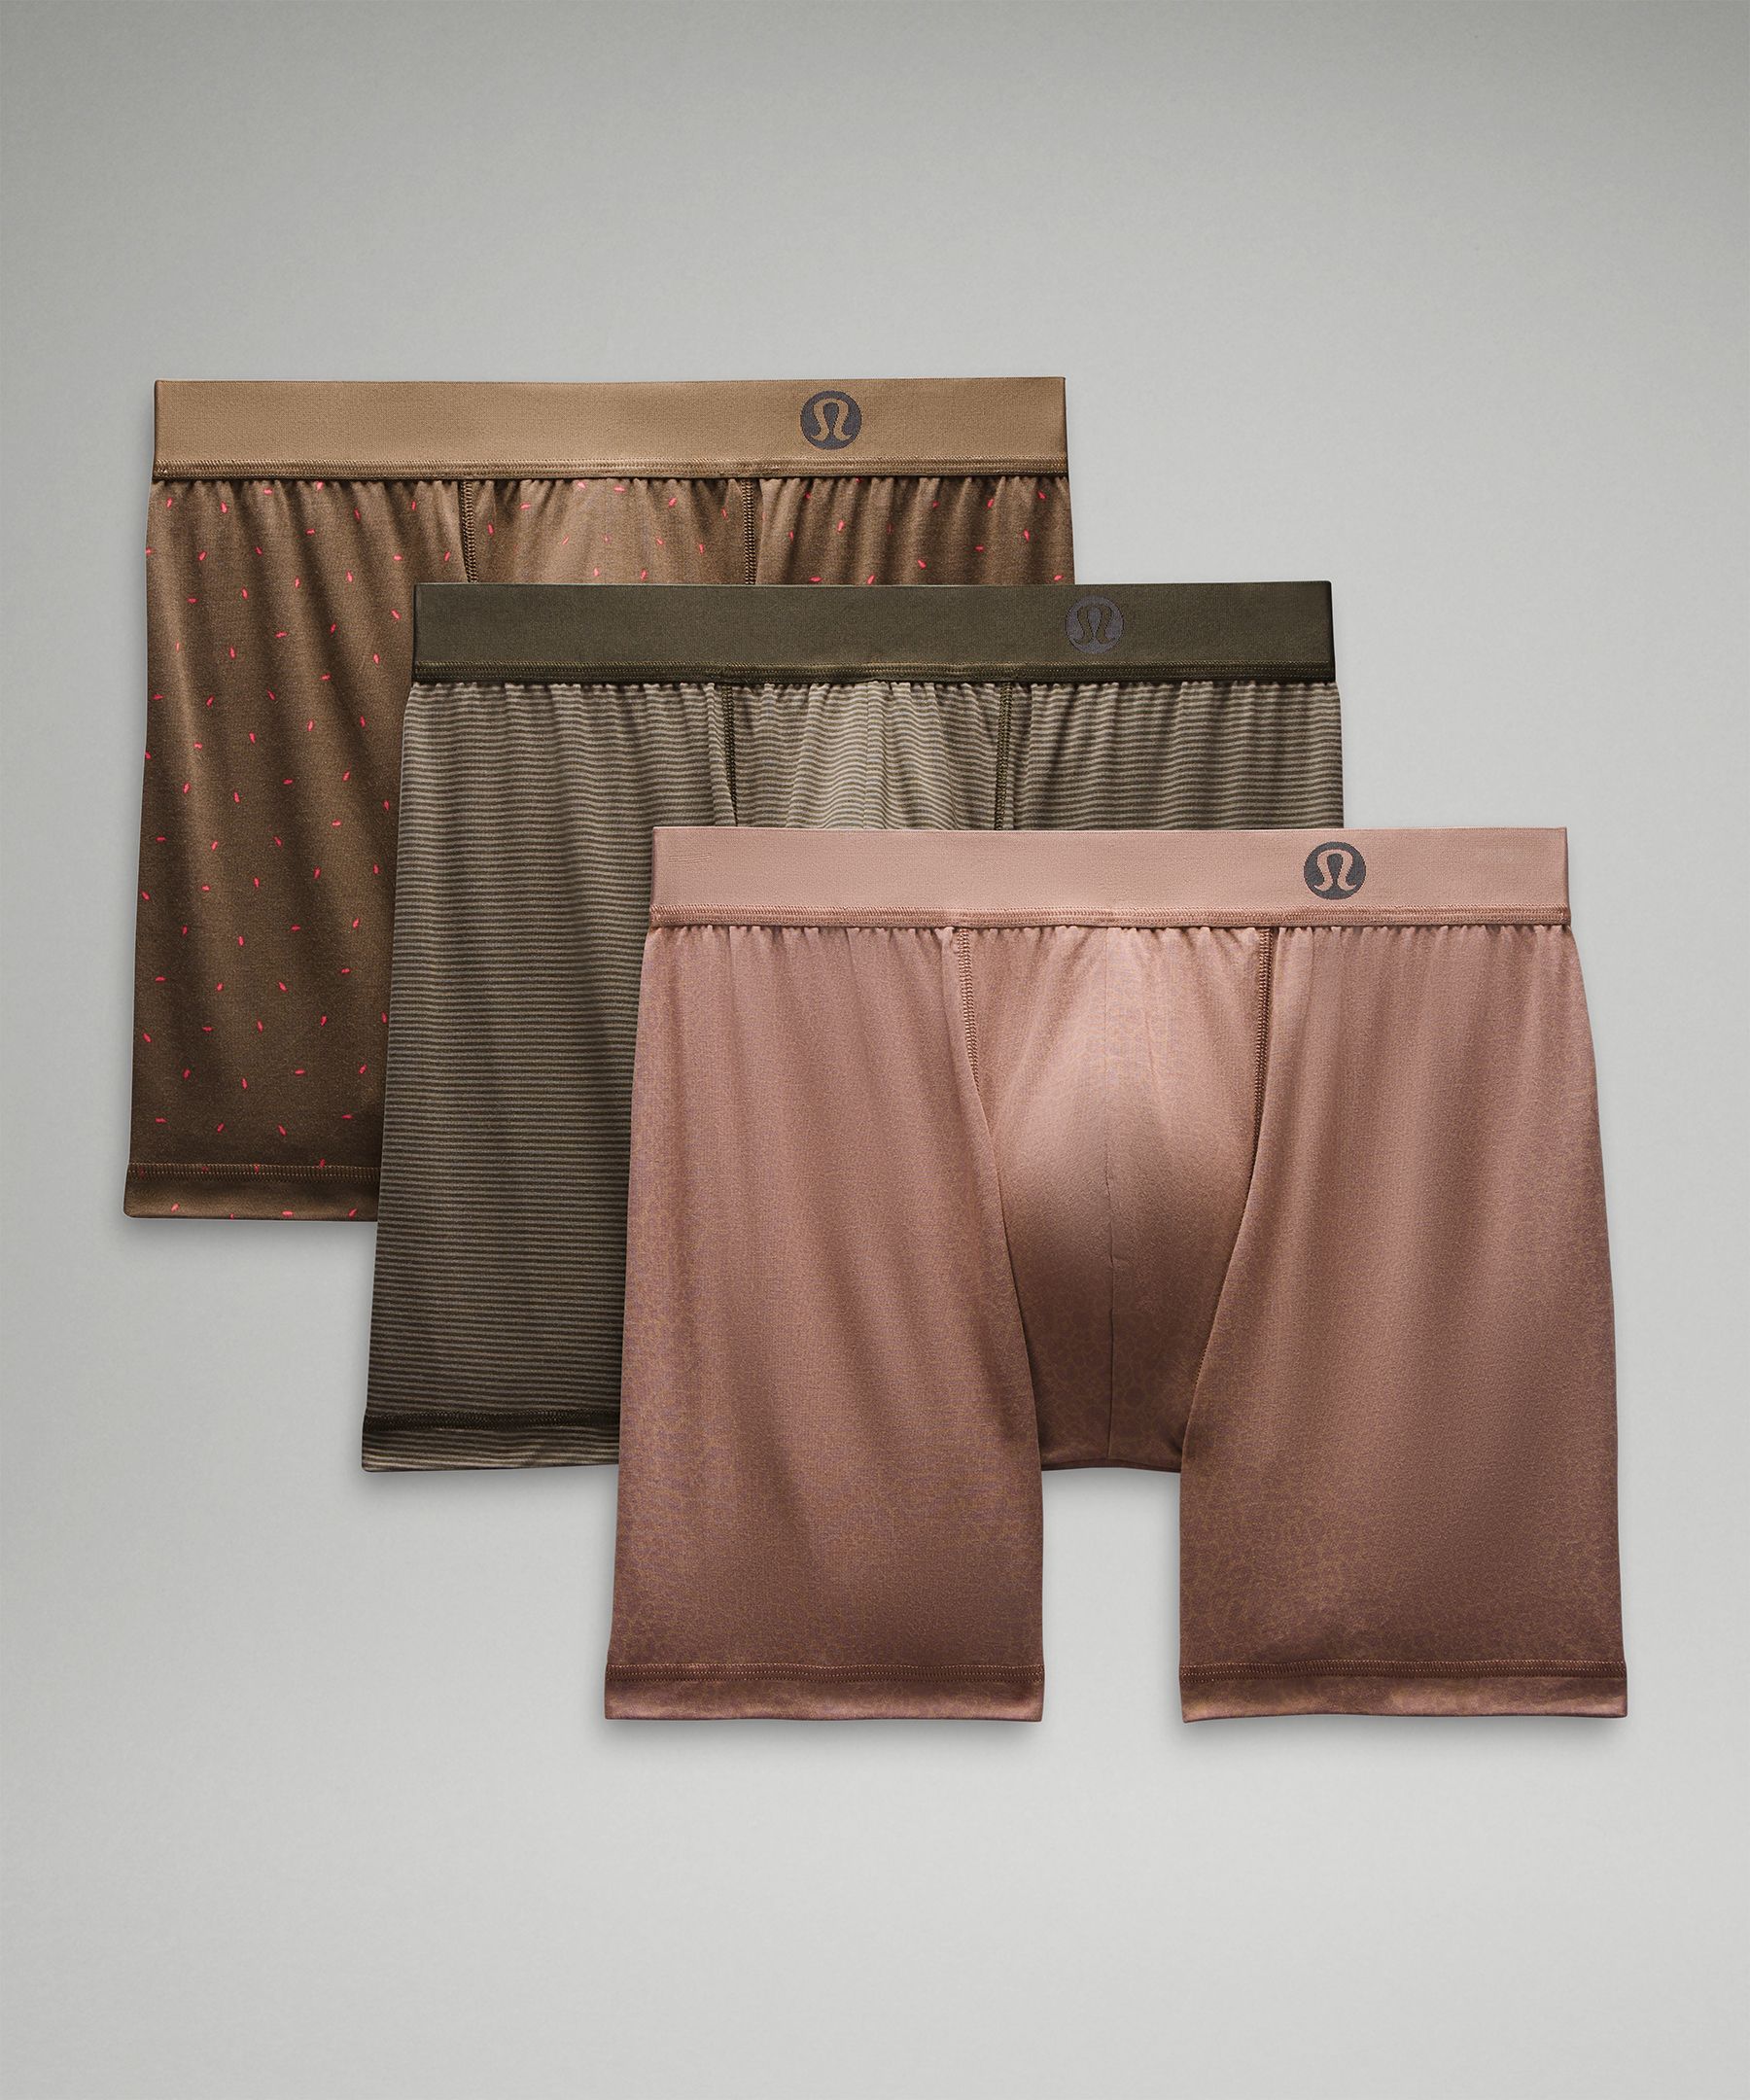 Underwear For Men - As Adaptable As You Are